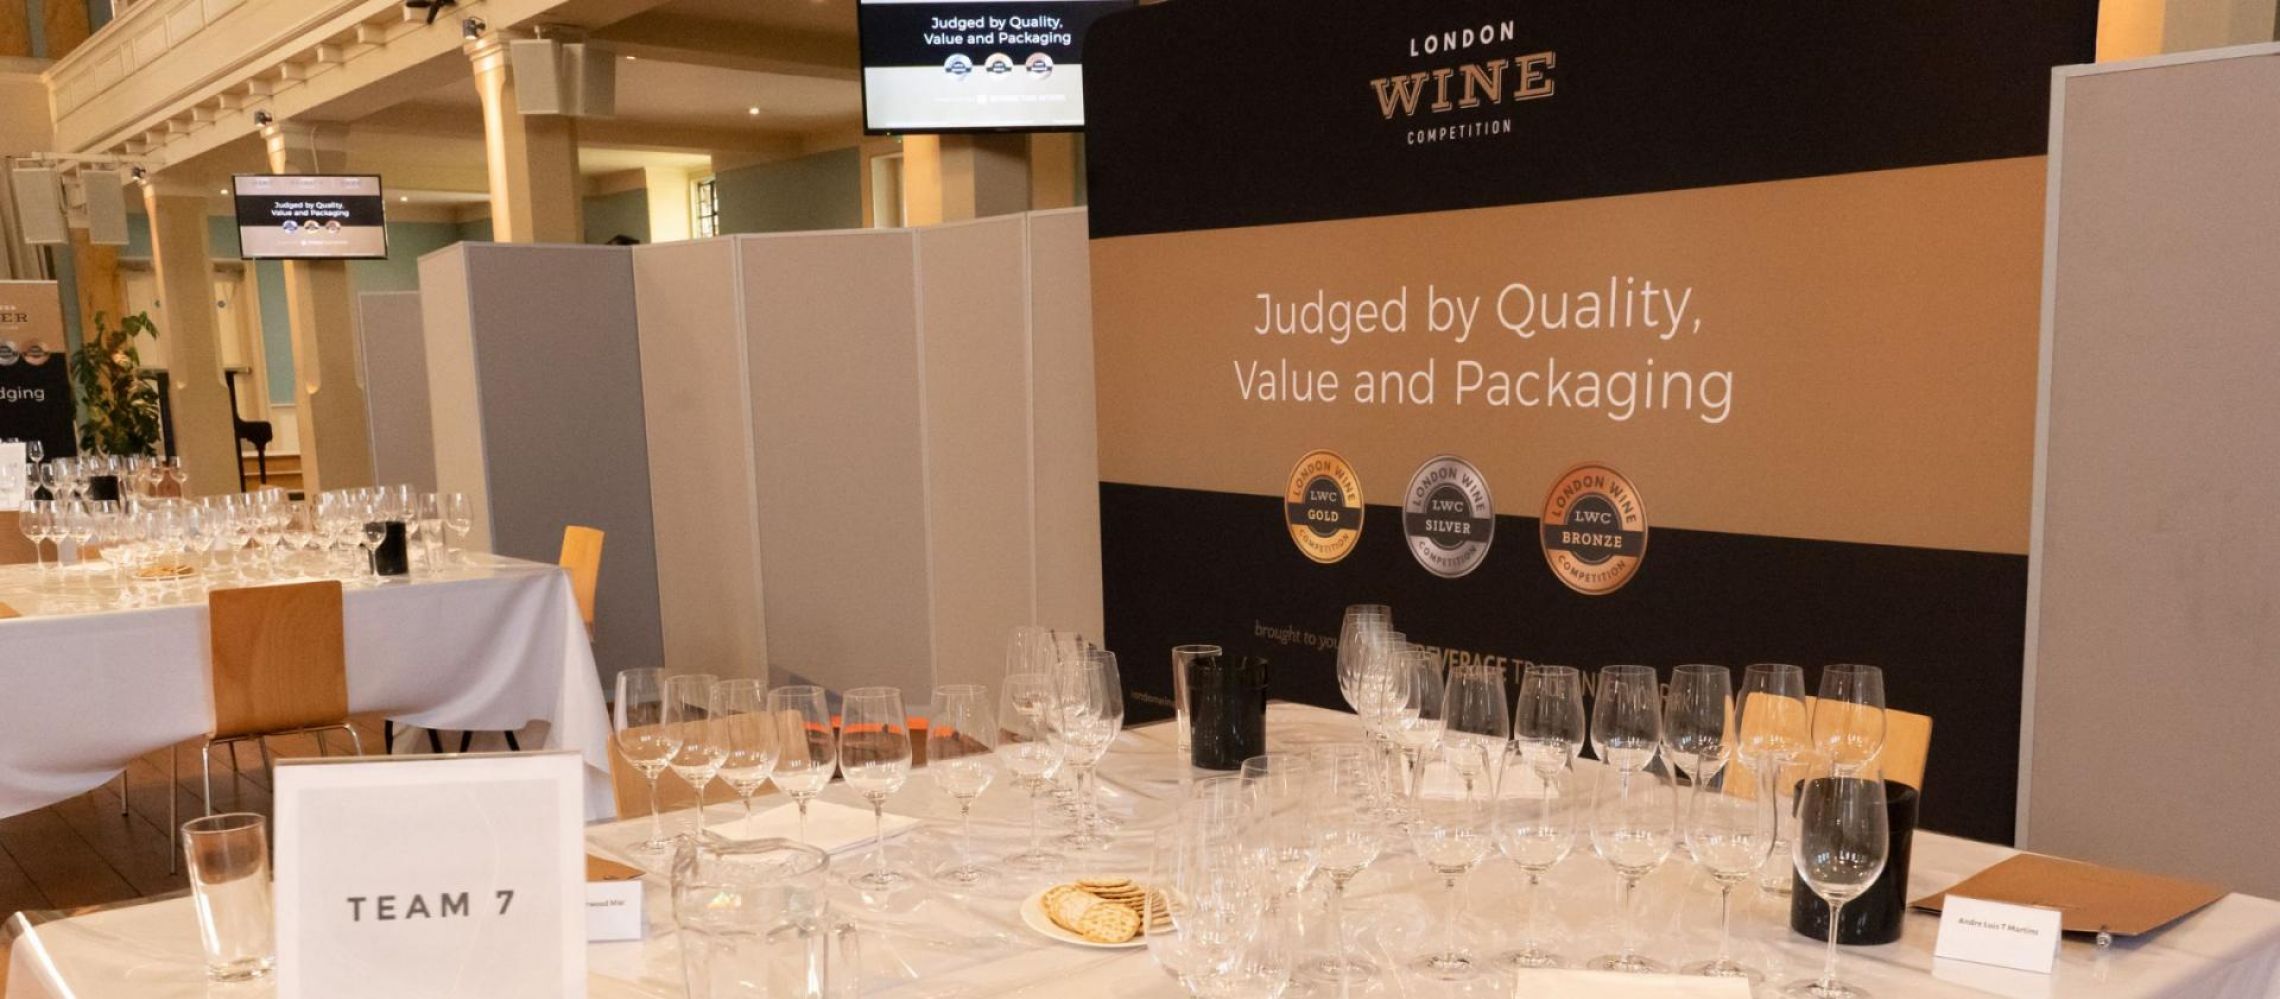 Photo for: How London Wine Competition can put your wine brand in the spotlight